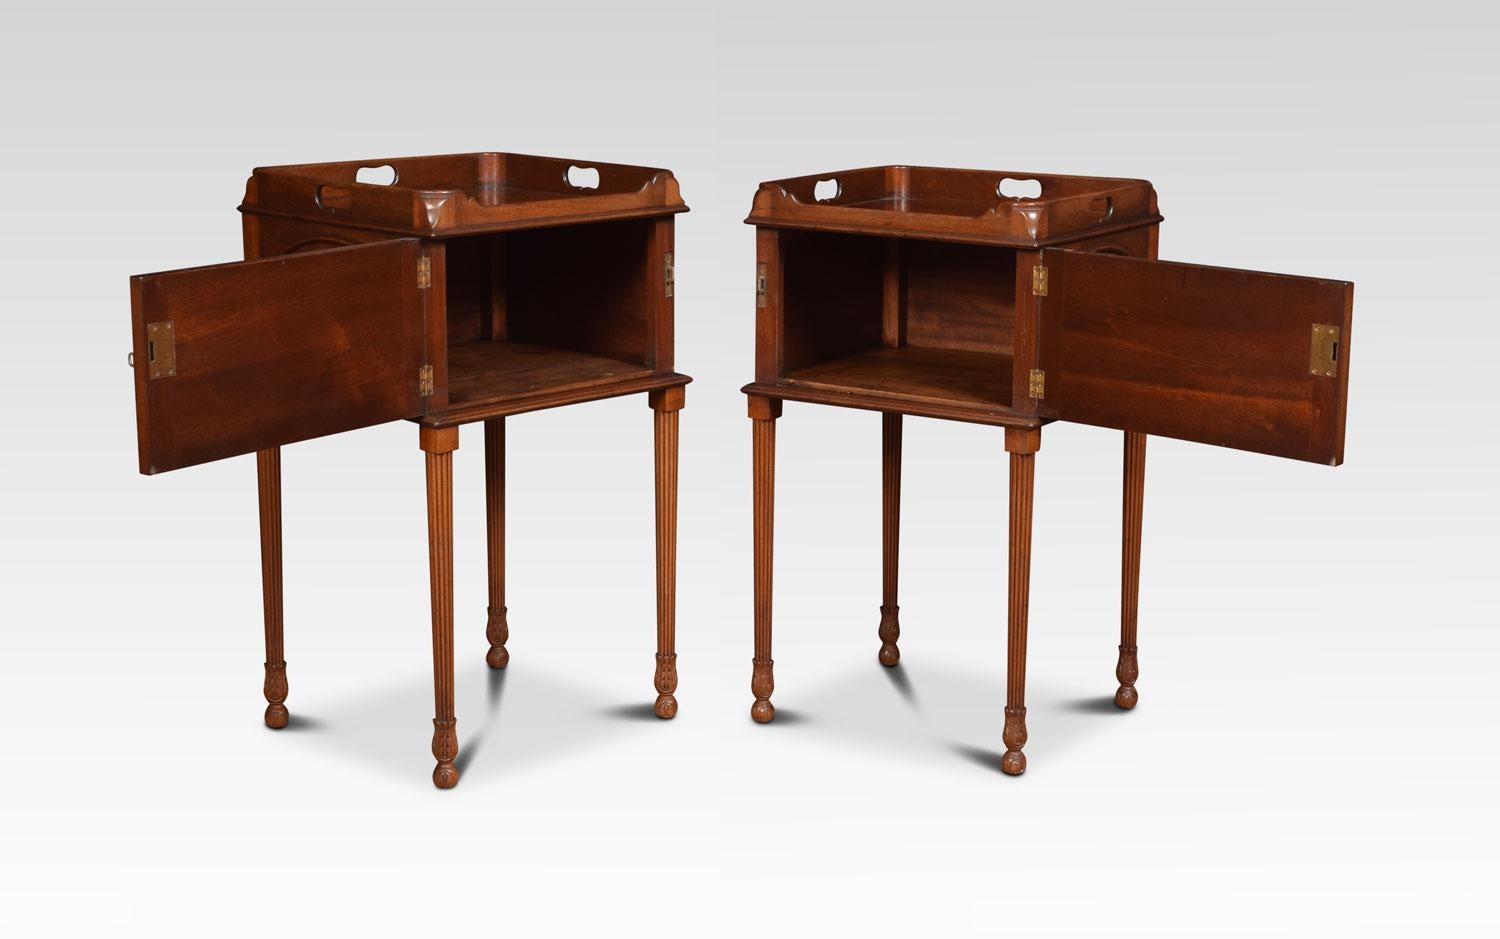 Pair of mahogany bedside cupboards each with tray tops, above oval moulded flame mahogany doors. All raised up on reeded fluted legs.
Dimensions:
Height 31.5 inches
Width 18.5 inches
Depth 16.5 inches.